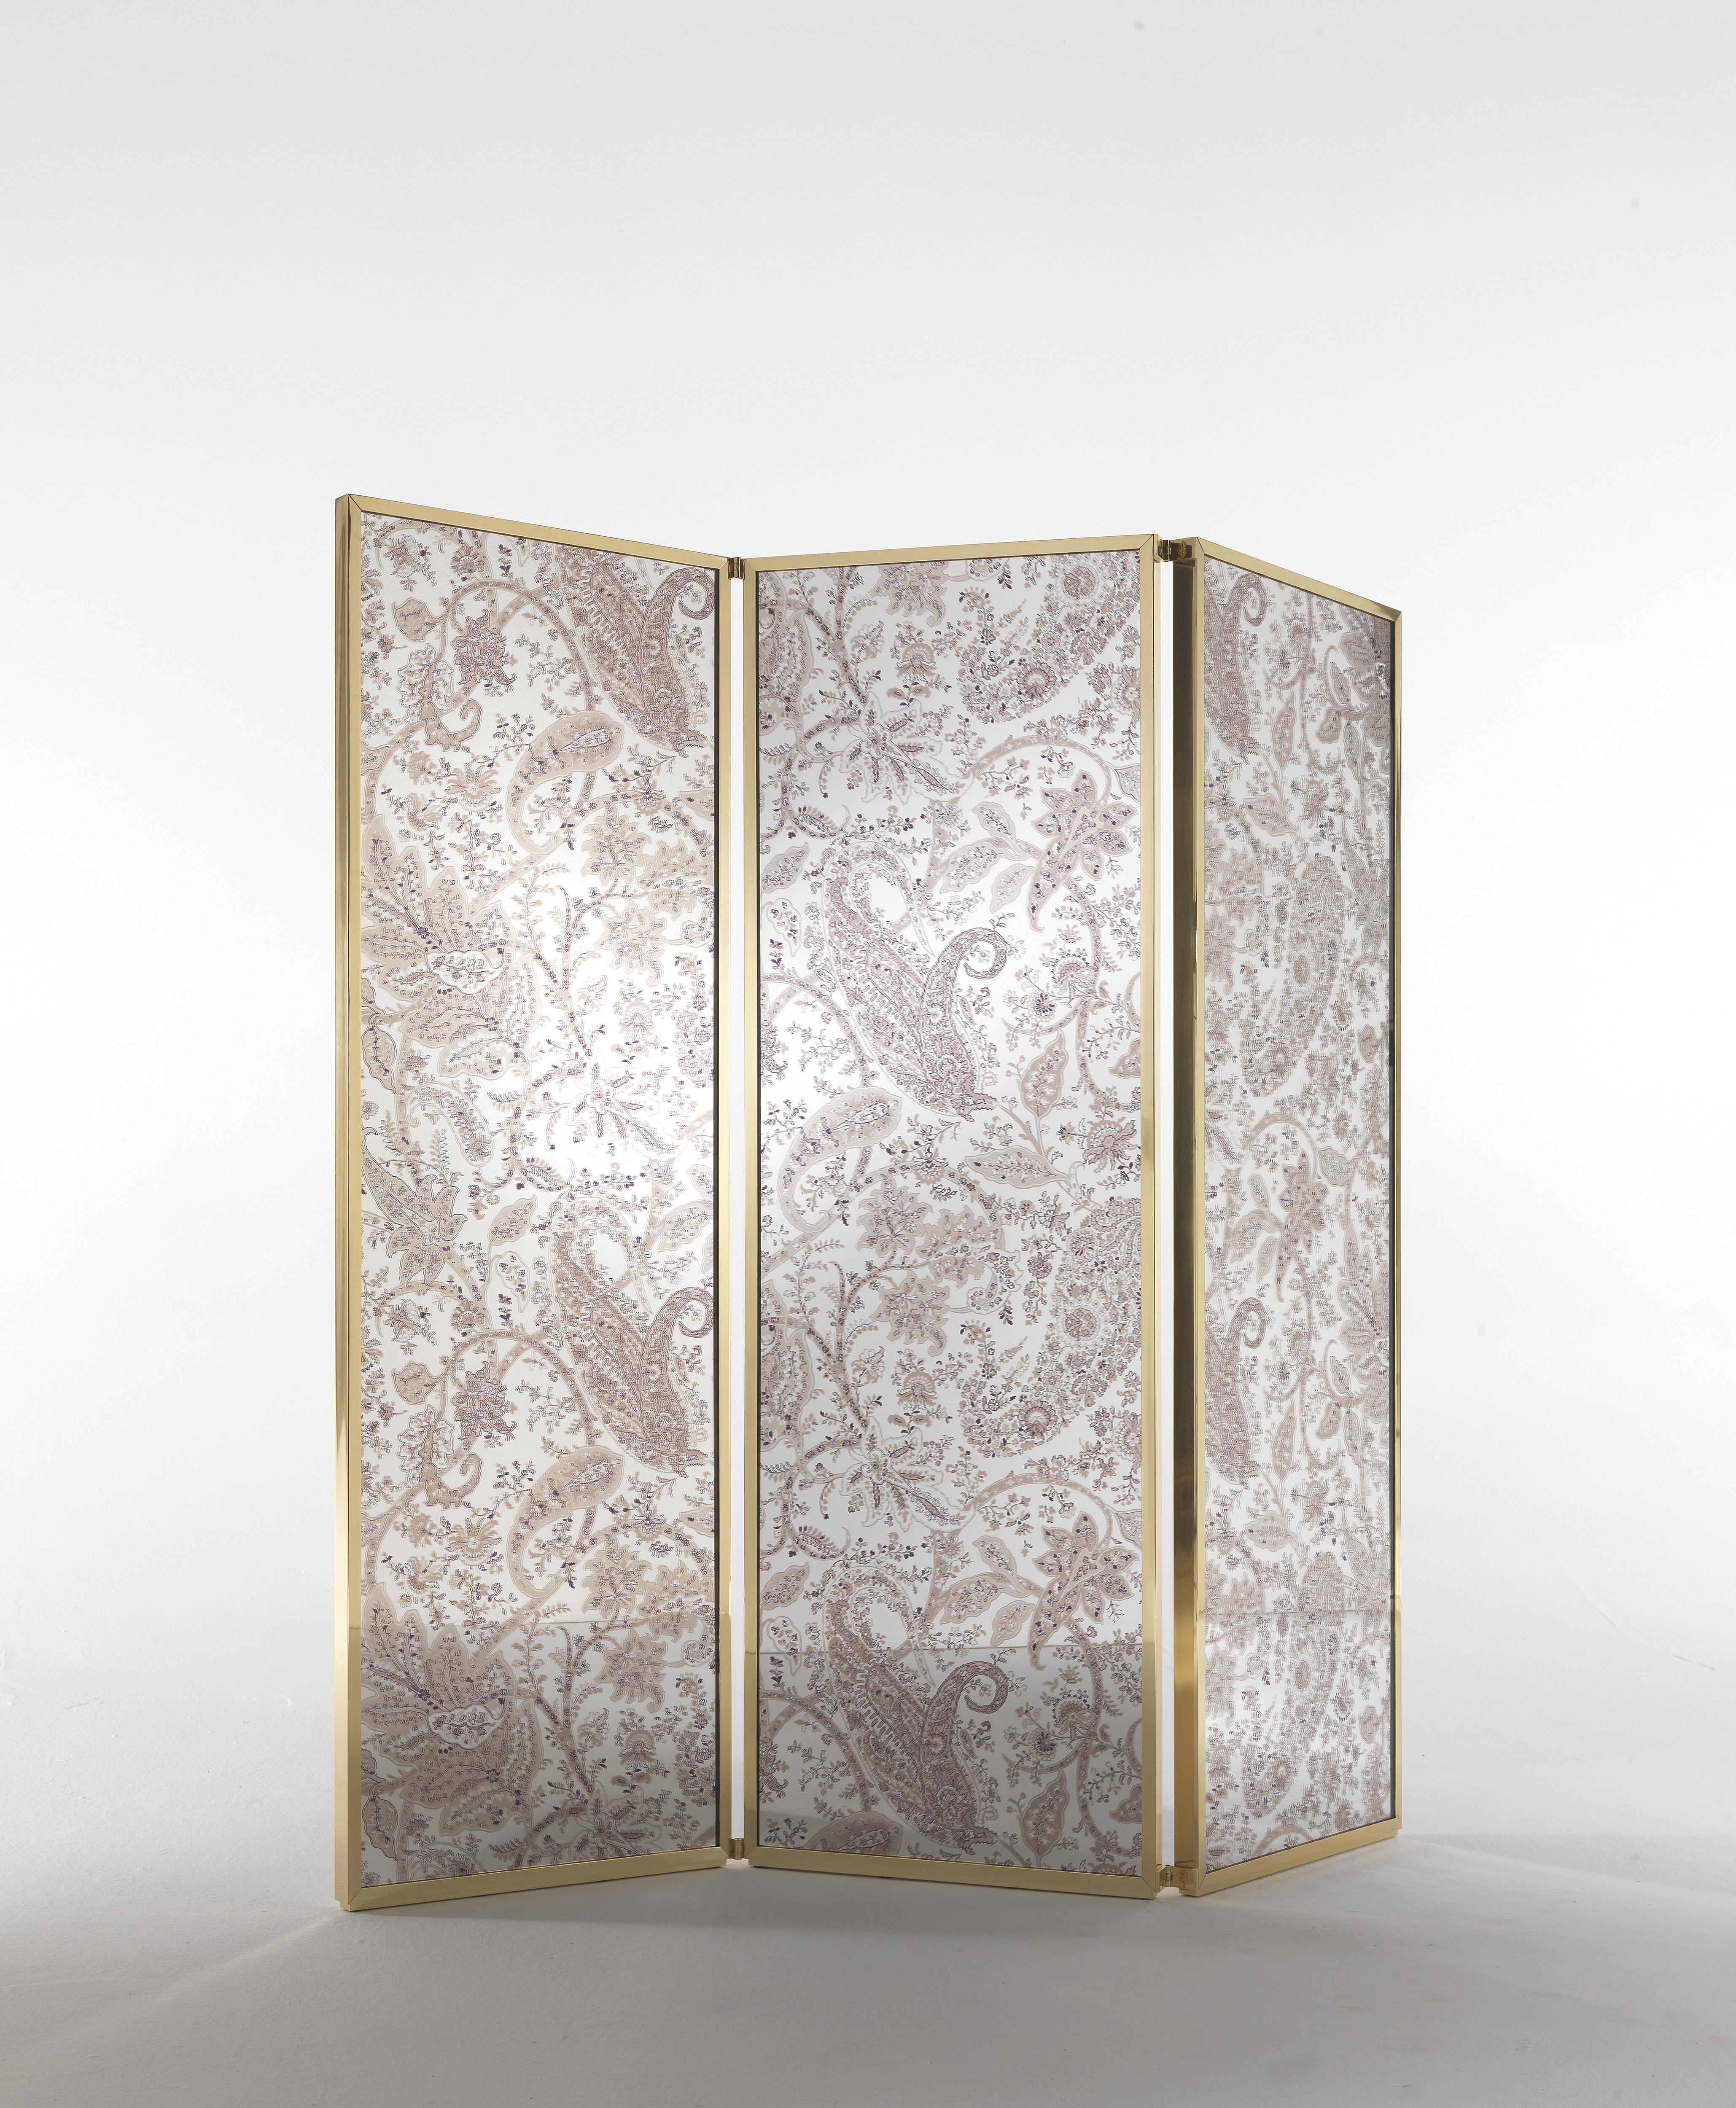 Refinement, spirituality and introspection are the main  themes underlying this sophisticated screen: the shining, ethereal fabric combines with the polished brass profiles creating a harmonious set able to add charm to any environment.

Wooden